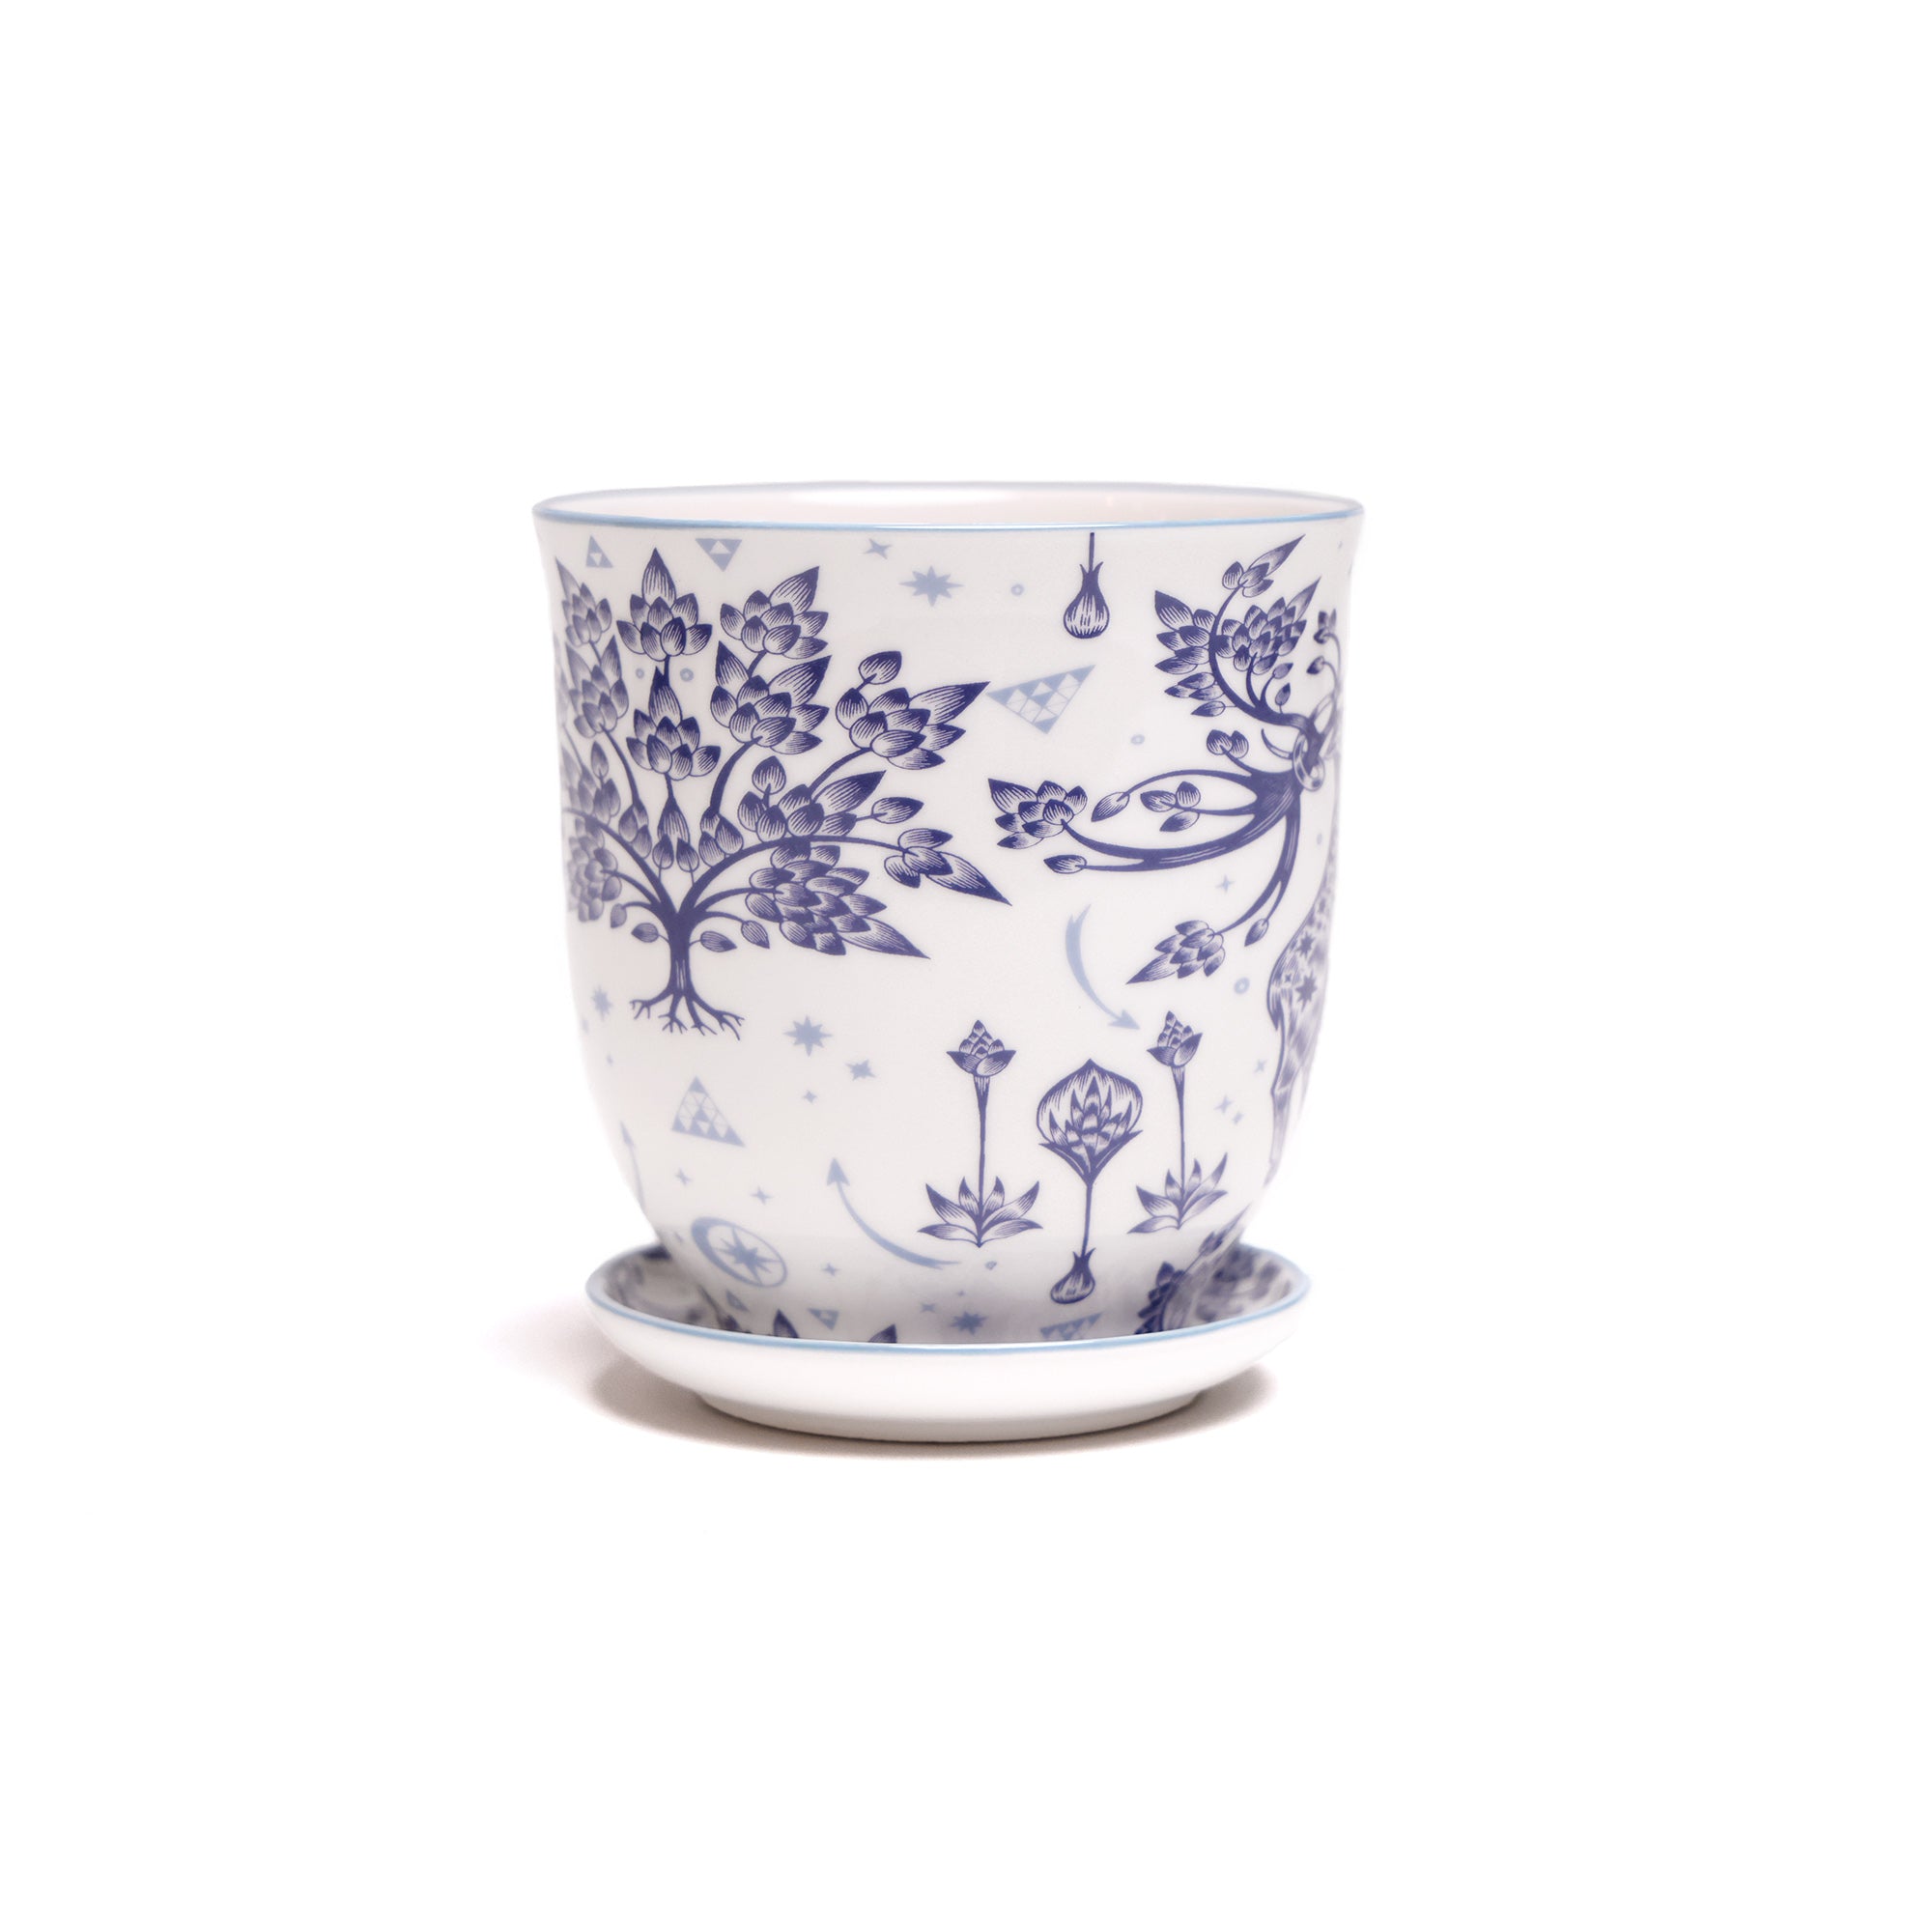 Liberte 5 Porcelain Pot And Saucer With Drainage - Chive Studio Canada